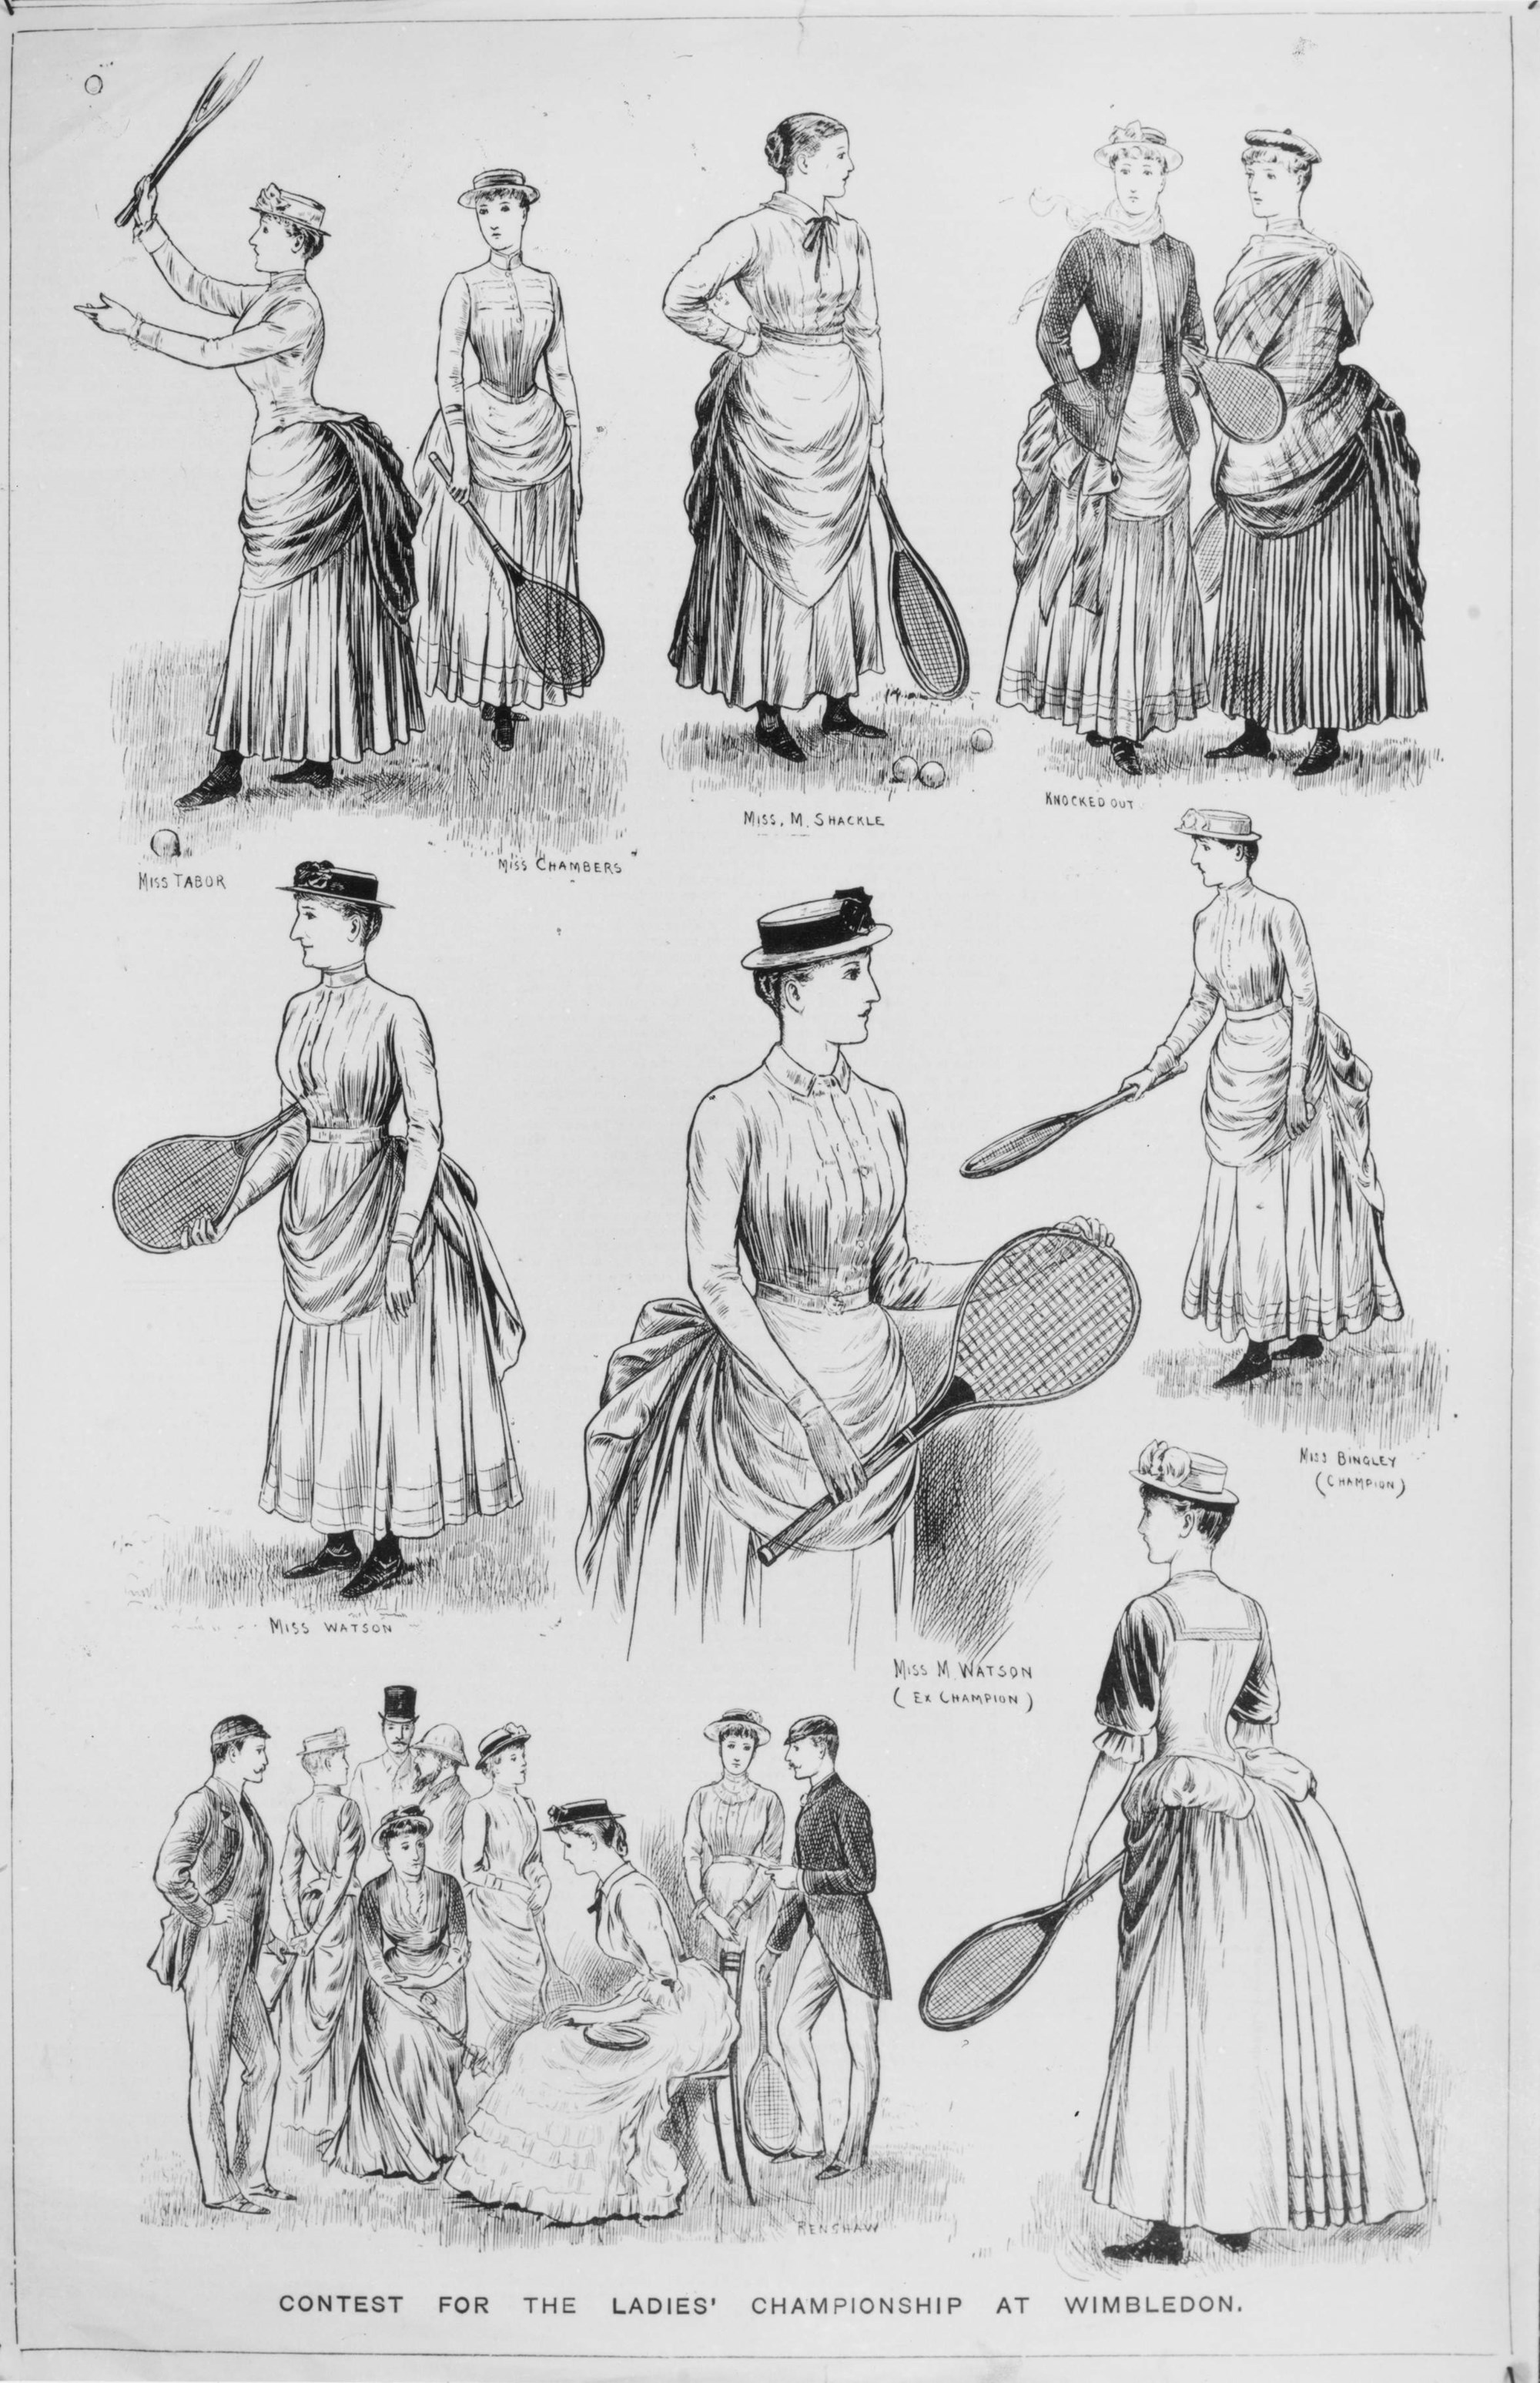 Contestants in the ladies' tennis championships at Wimbledon in 1886 featuring former champion, Miss Maud Watson